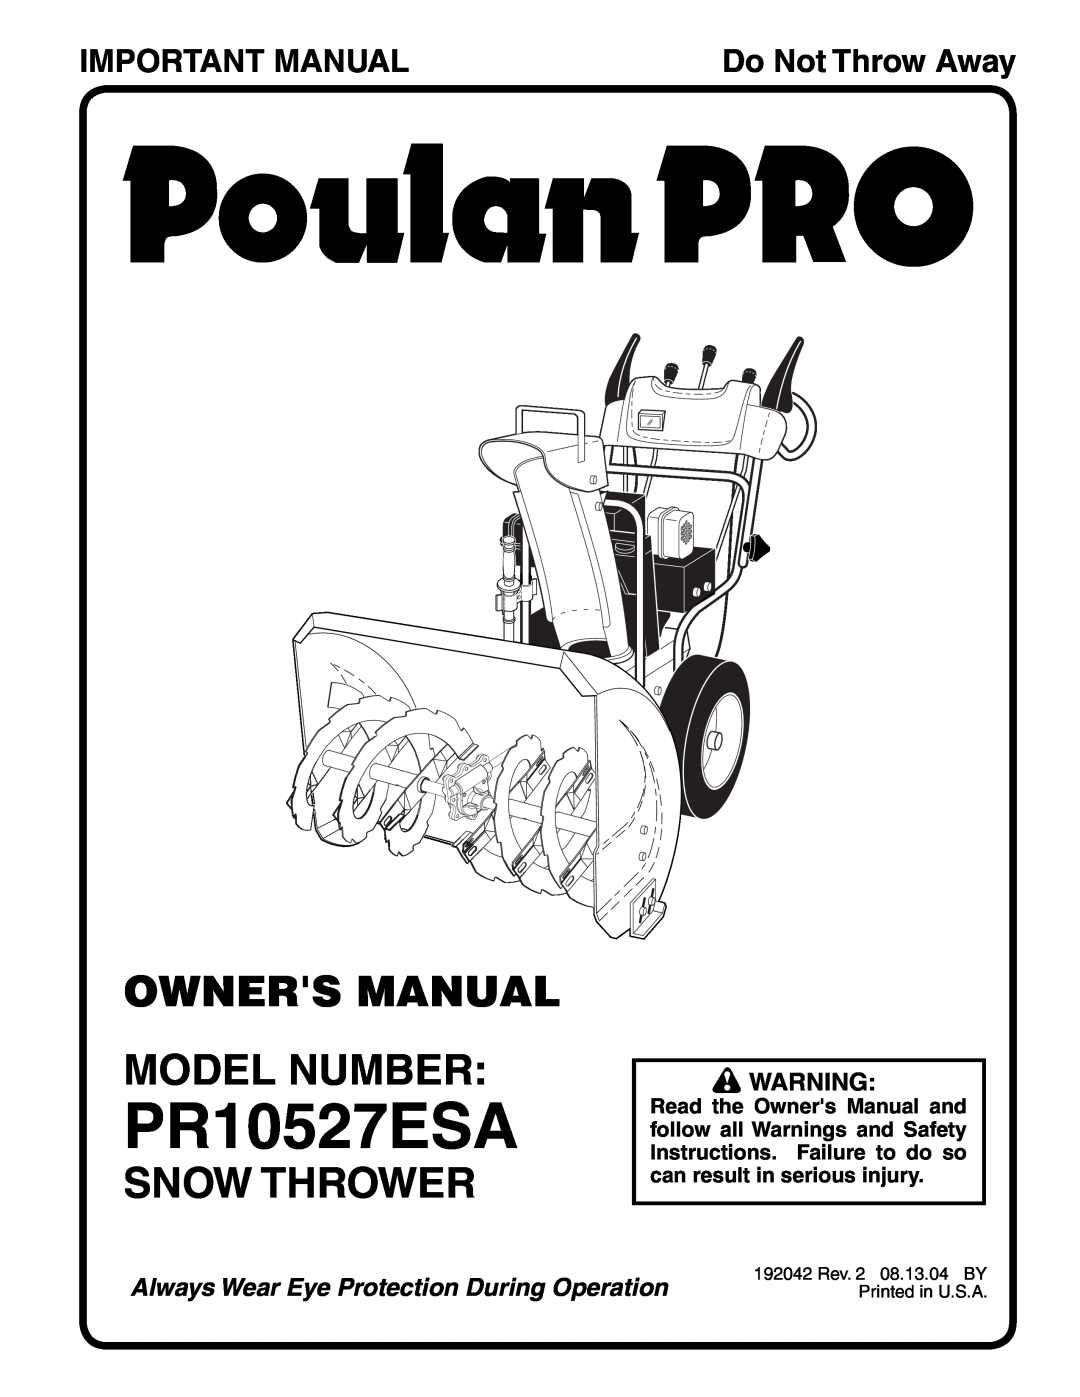 Poulan PR10527ESA owner manual Owners Manual Model Number, Snow Thrower, Important Manual, Do Not Throw Away 